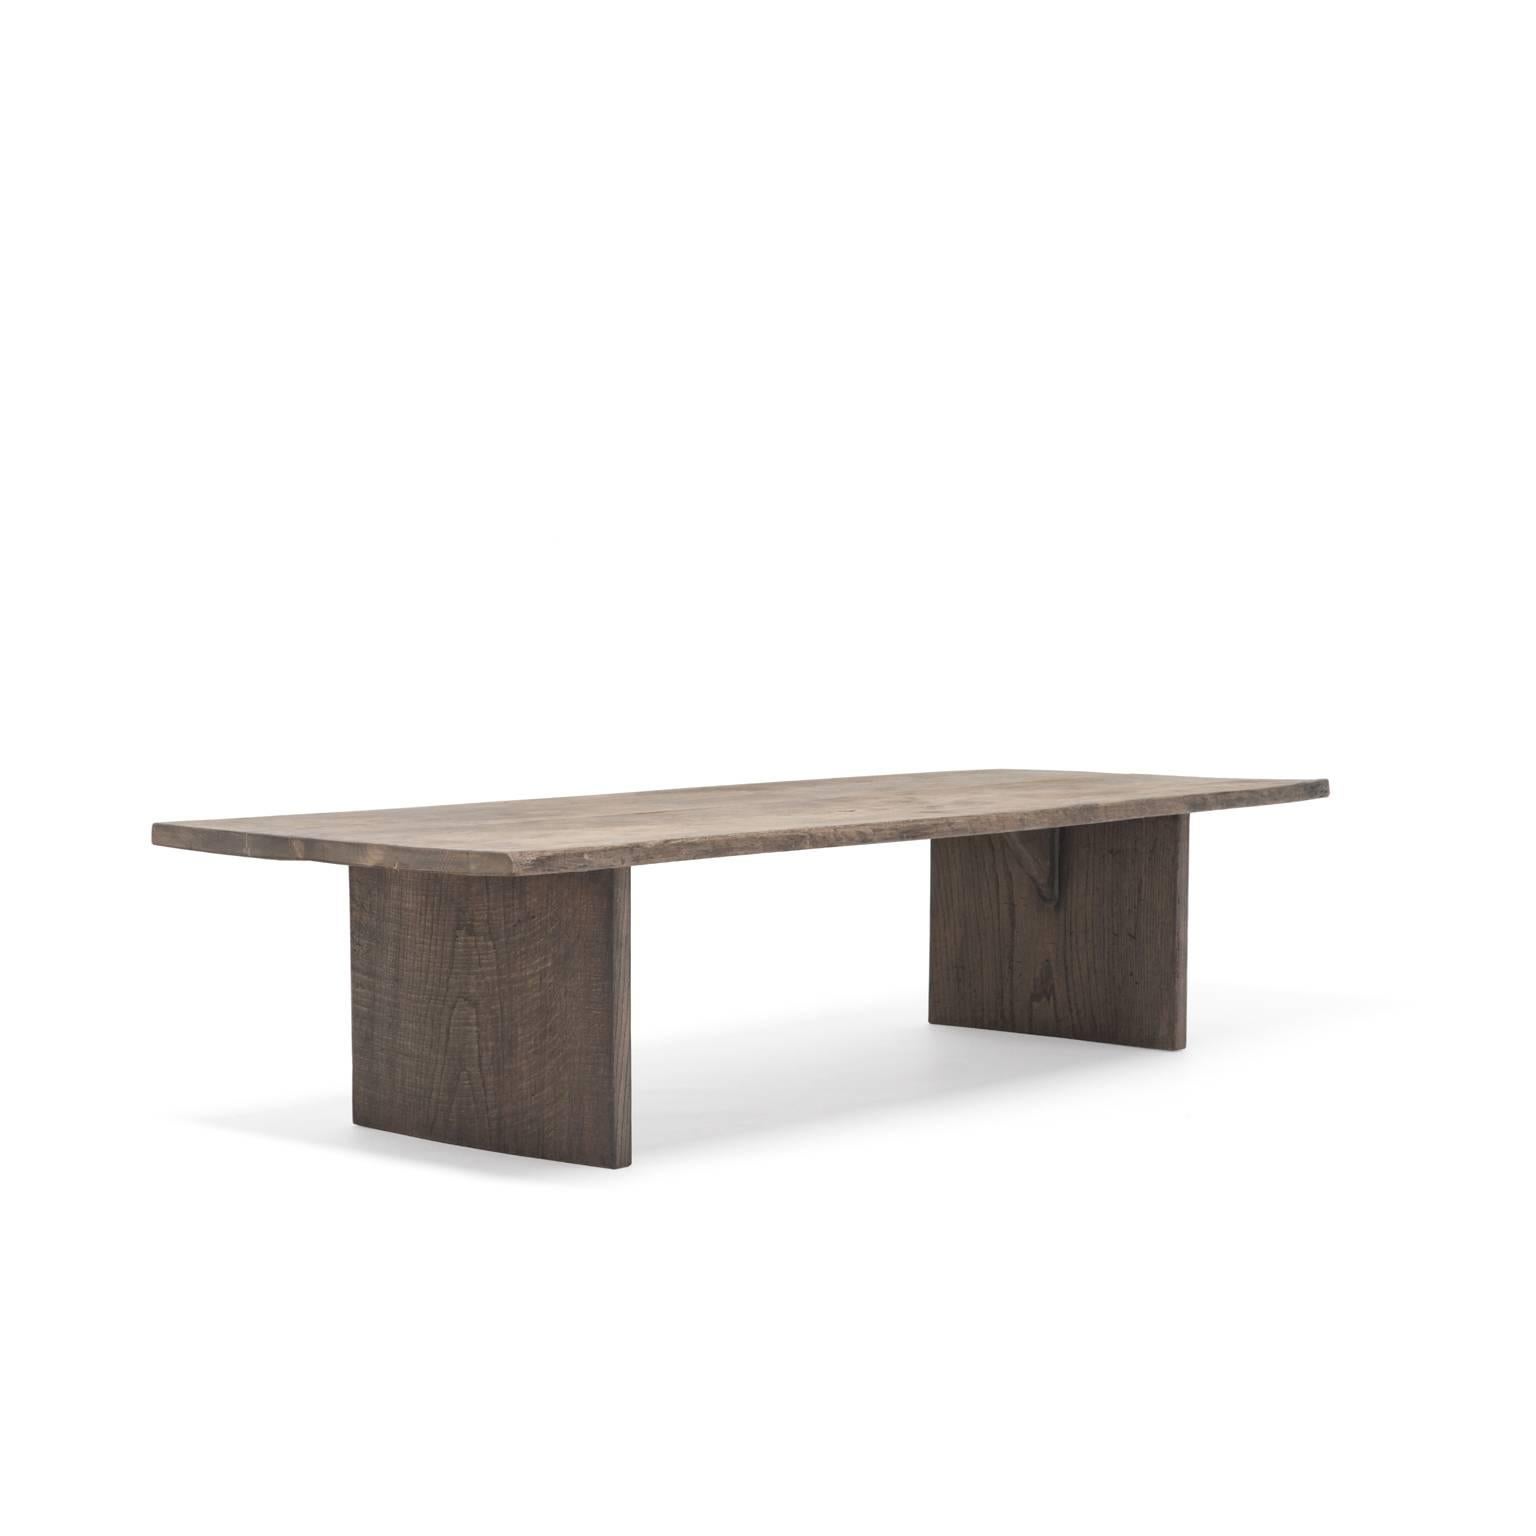 Atelier Demiurge Collection Catalonian Coffee Table shown in 18th c. chestnut with natural finish. Inquire for finish and customization options.

Atelier Demiurge Collection pieces are made to order, and custom sizes are available. Please contact